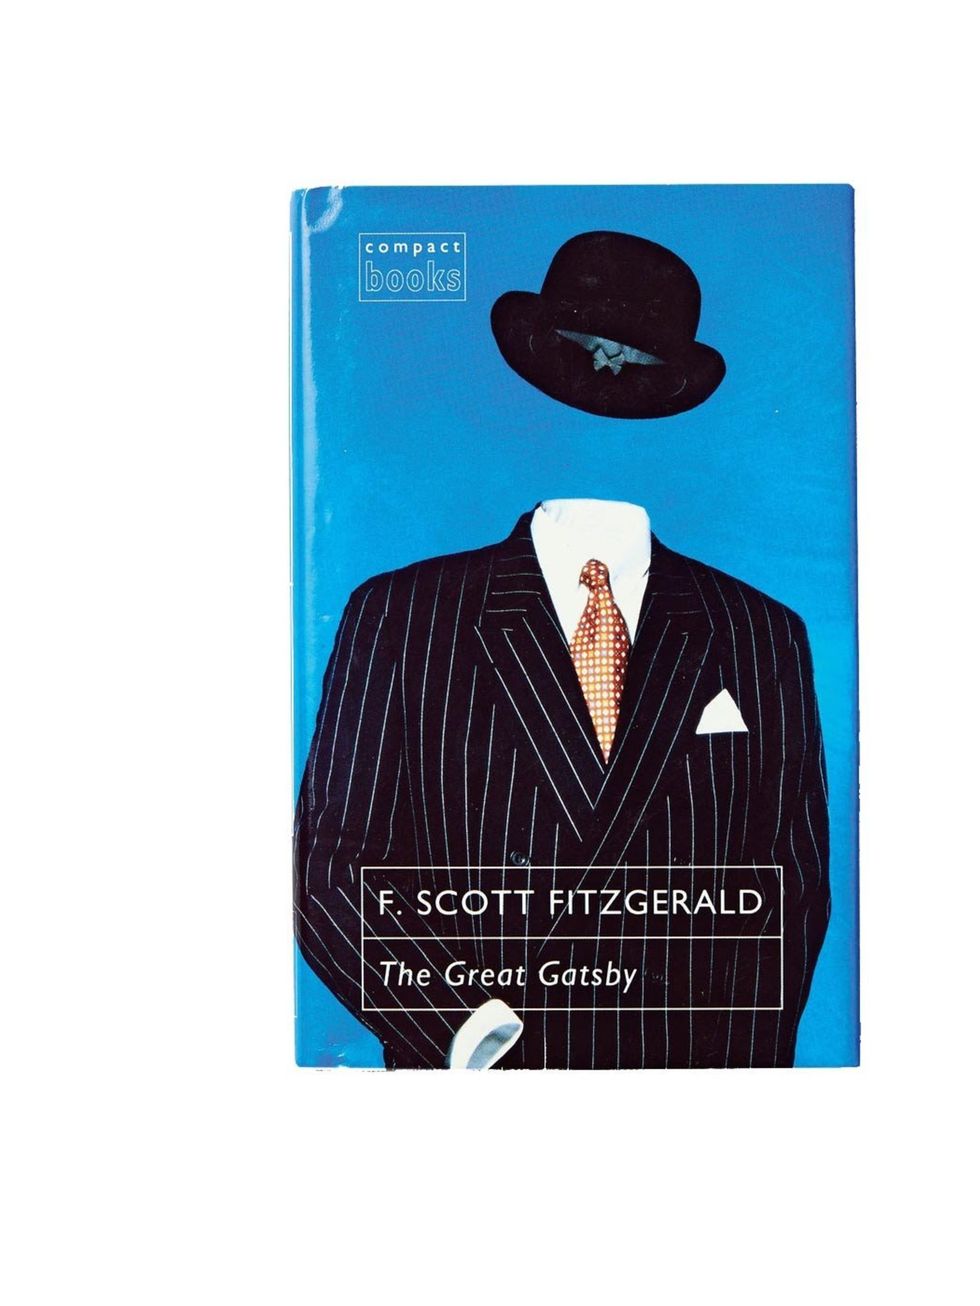 <p><strong>Surreal Gatsby: </strong>We appreciate how this odd cover embodies the enigma of Jay Gatsbys identity, using Magrittes free-floating bowler-hatted figure.</p><p>Born in the 20s like Art Deco, Surrealism attempted to reconcile unconscious drea